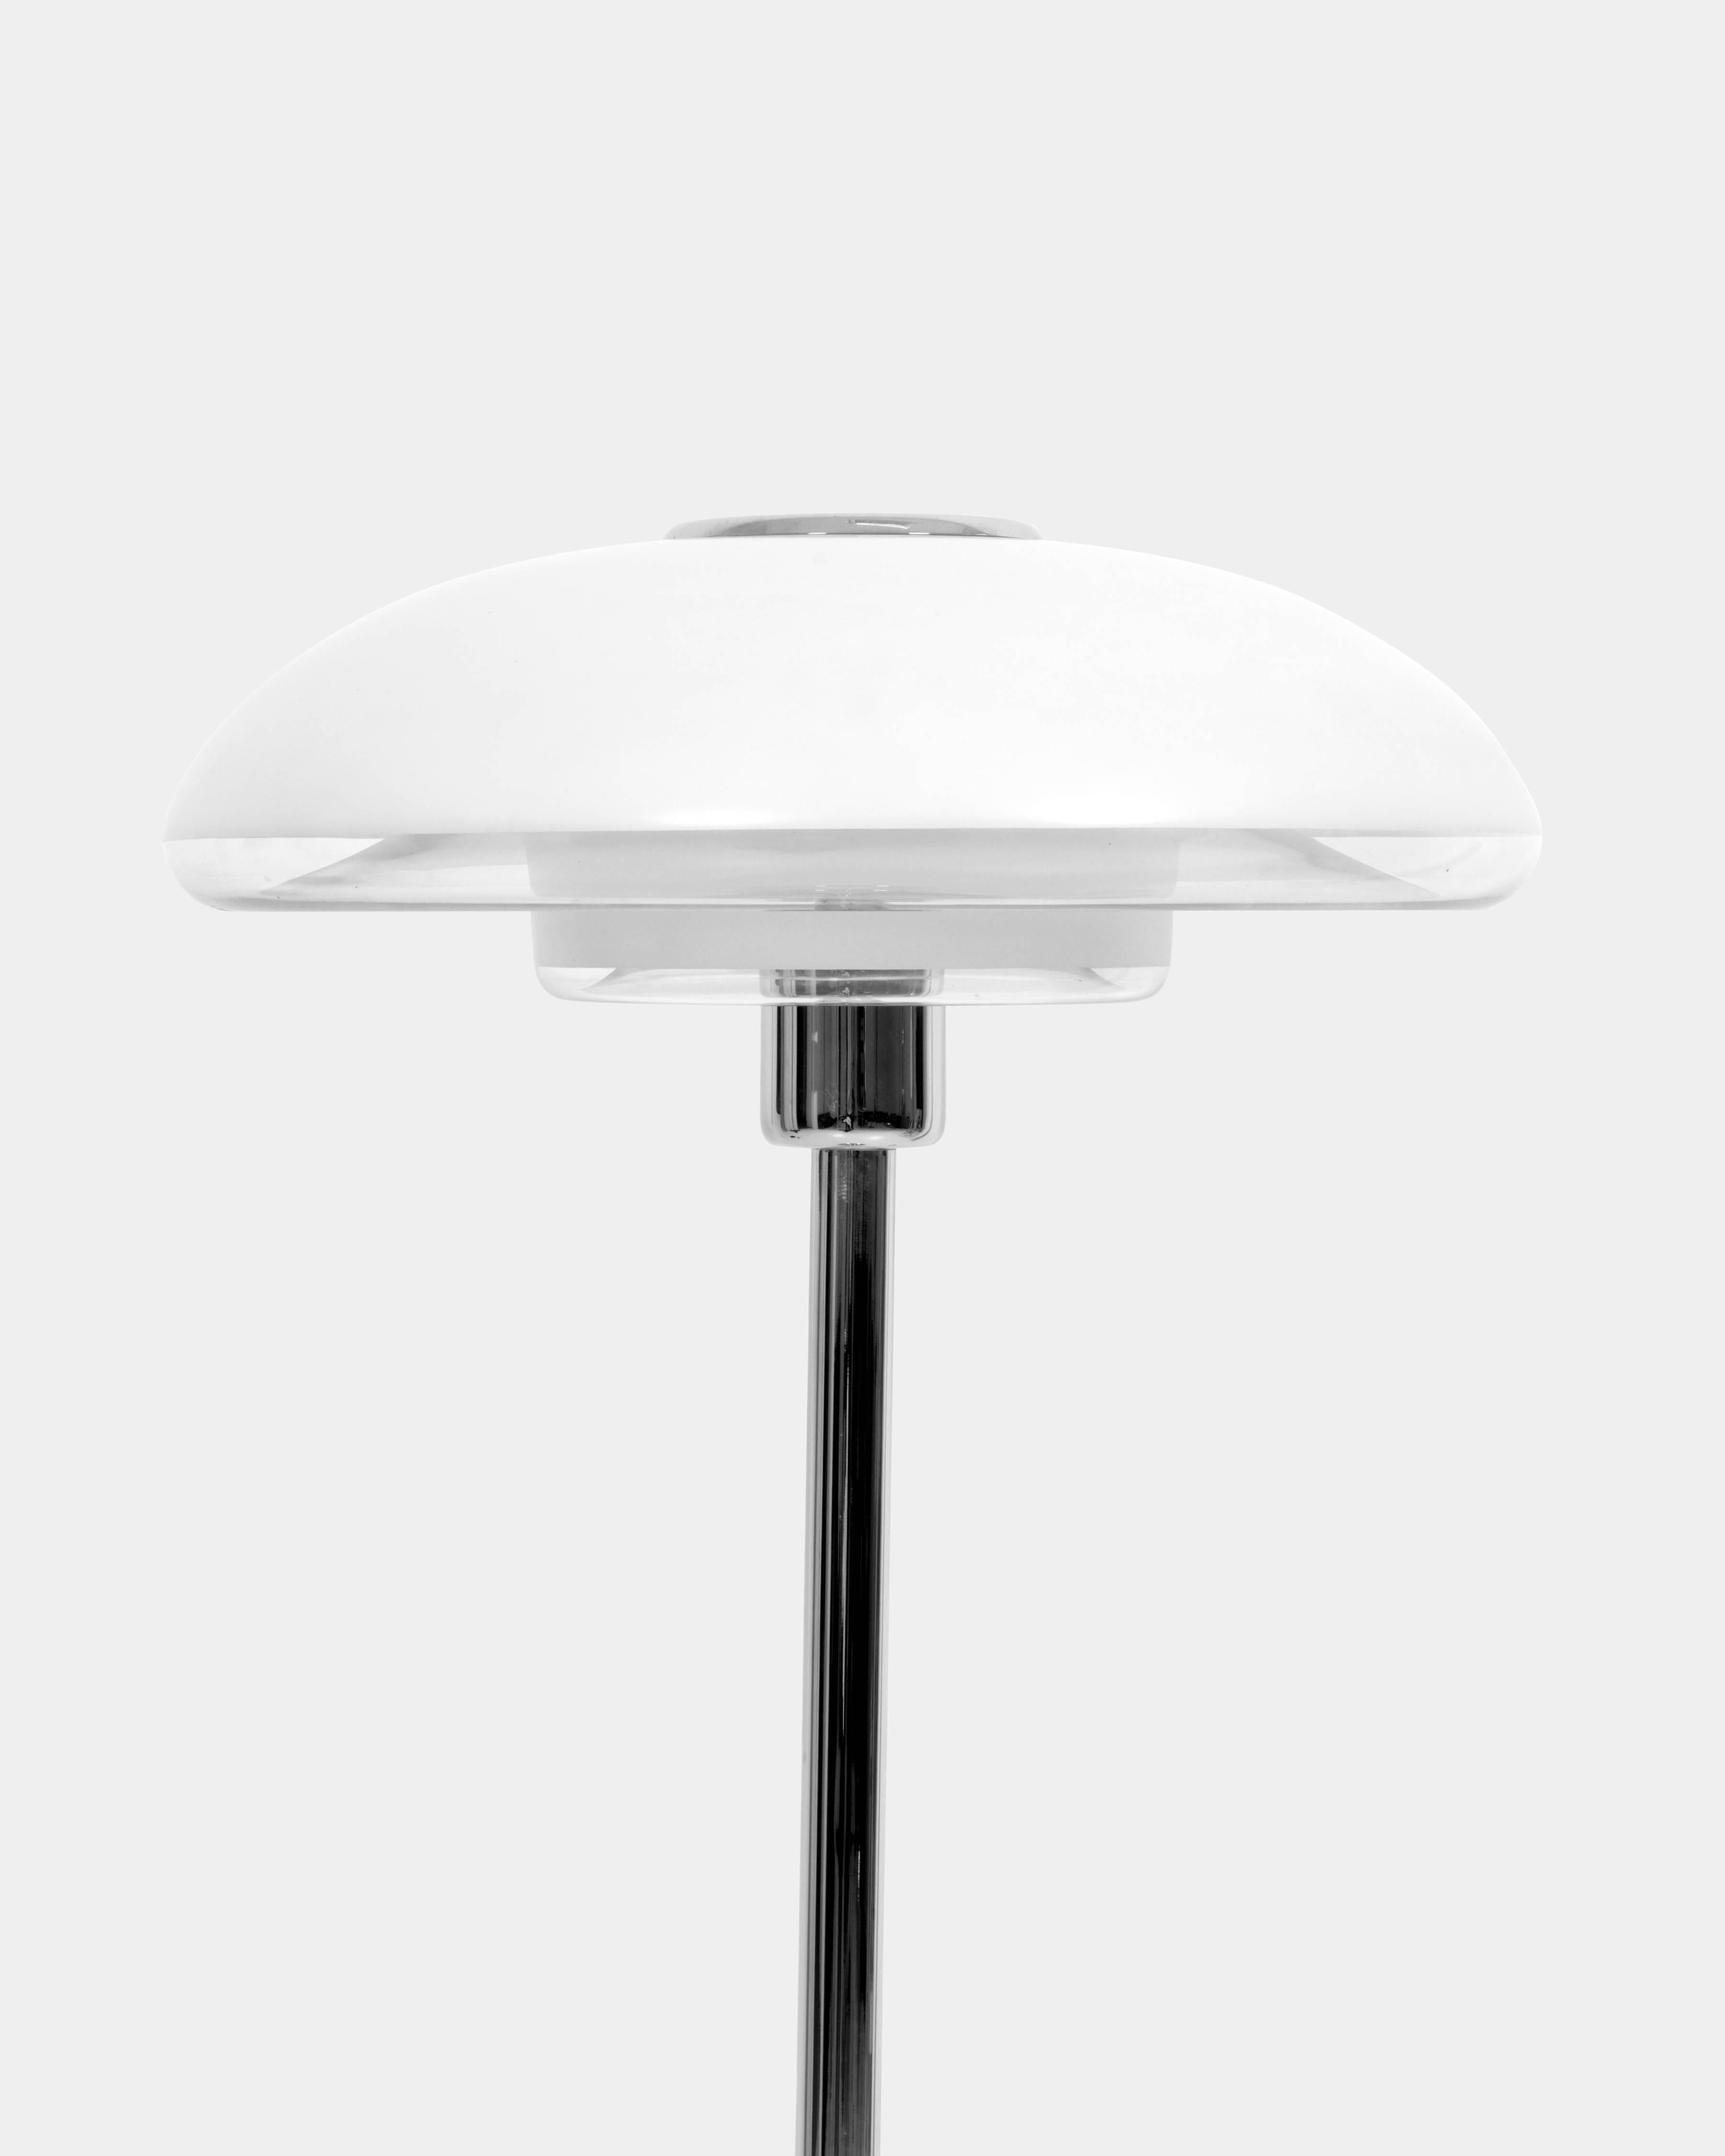 Verner Panton (1926-1998)
Europe/Europa 
Floor lamp by one of Denmark's most influential 20th-century furniture and interior designers. An iconic Panton lamp in chromed steel stand and partly frosted glass shade. 
Designed in 1977, manufactured by